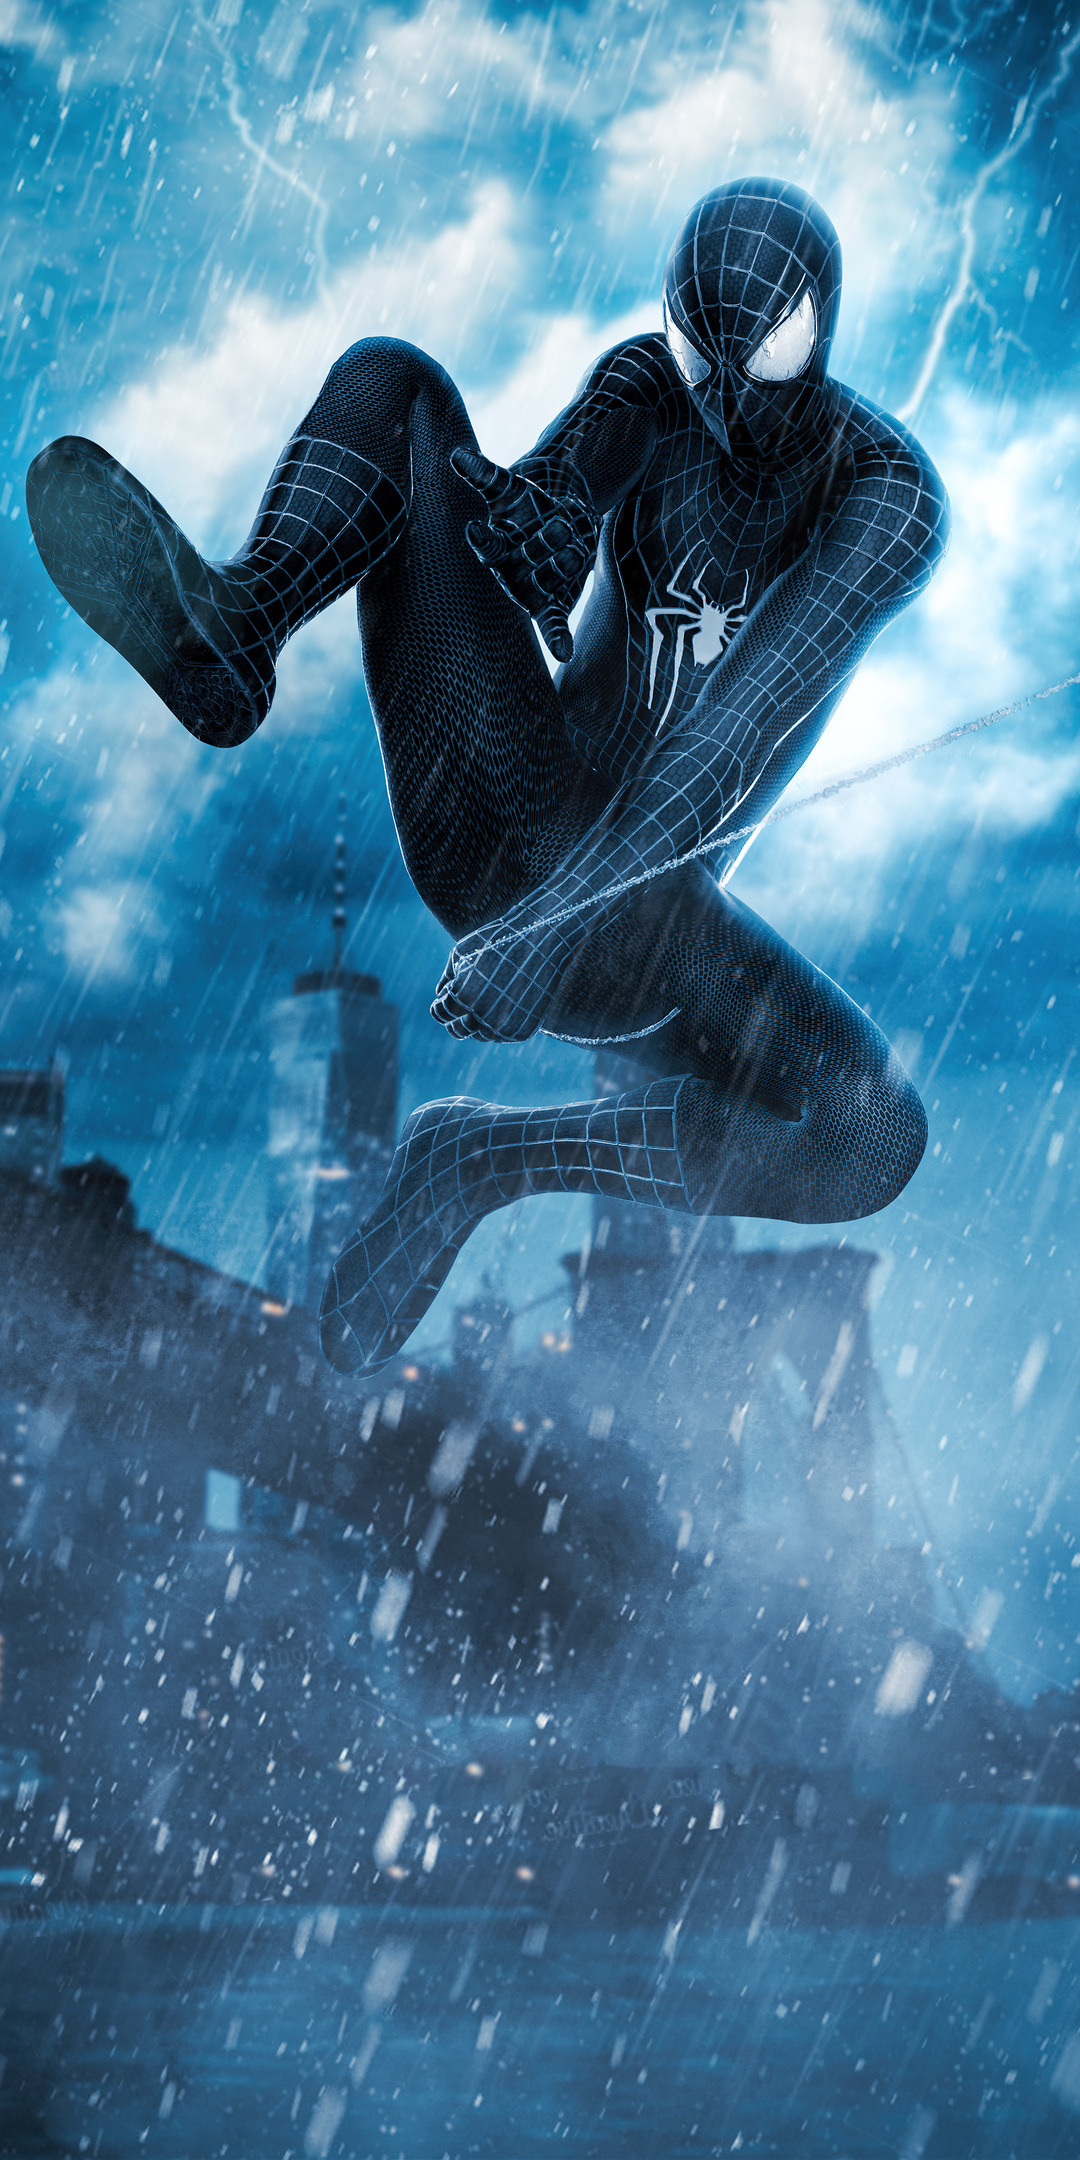 1080x2160 The Amazing Spider Man 3 Poster 5k One Plus 5T,Honor 7x,Honor  view 10,Lg Q6 HD 4k Wallpapers, Images, Backgrounds, Photos and Pictures